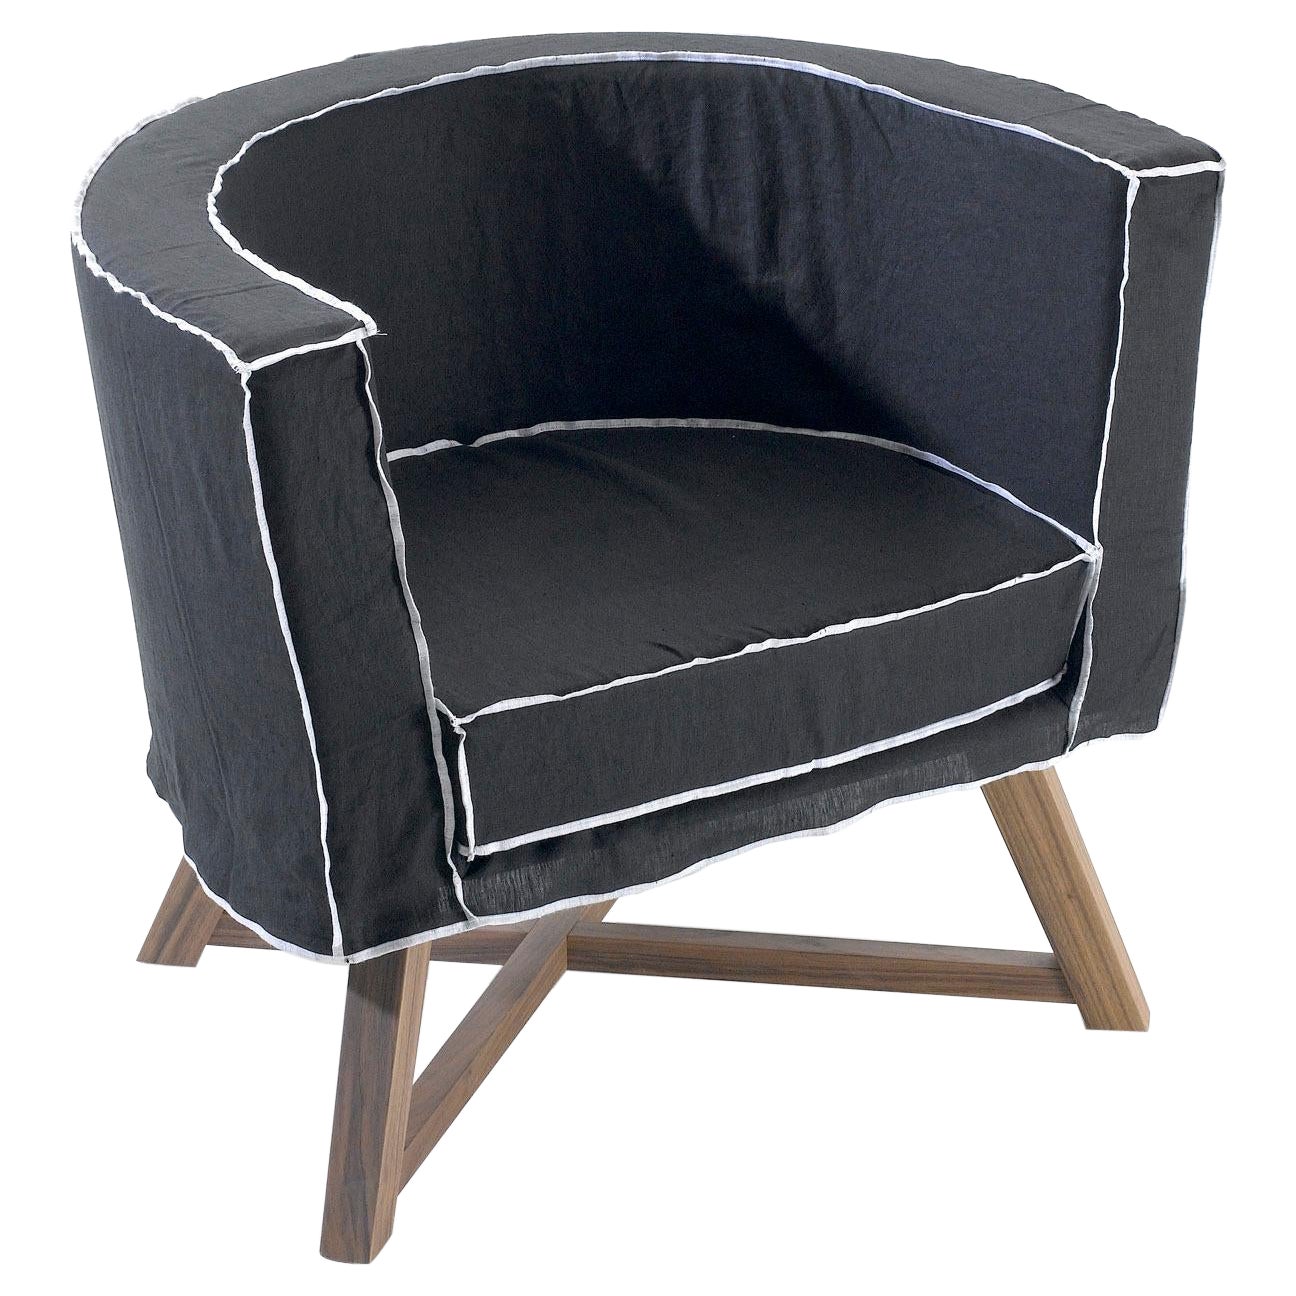 Gervasoni Gray 08 Armchair with Walnut Legs & Lead Upholstery, Paola Navone For Sale